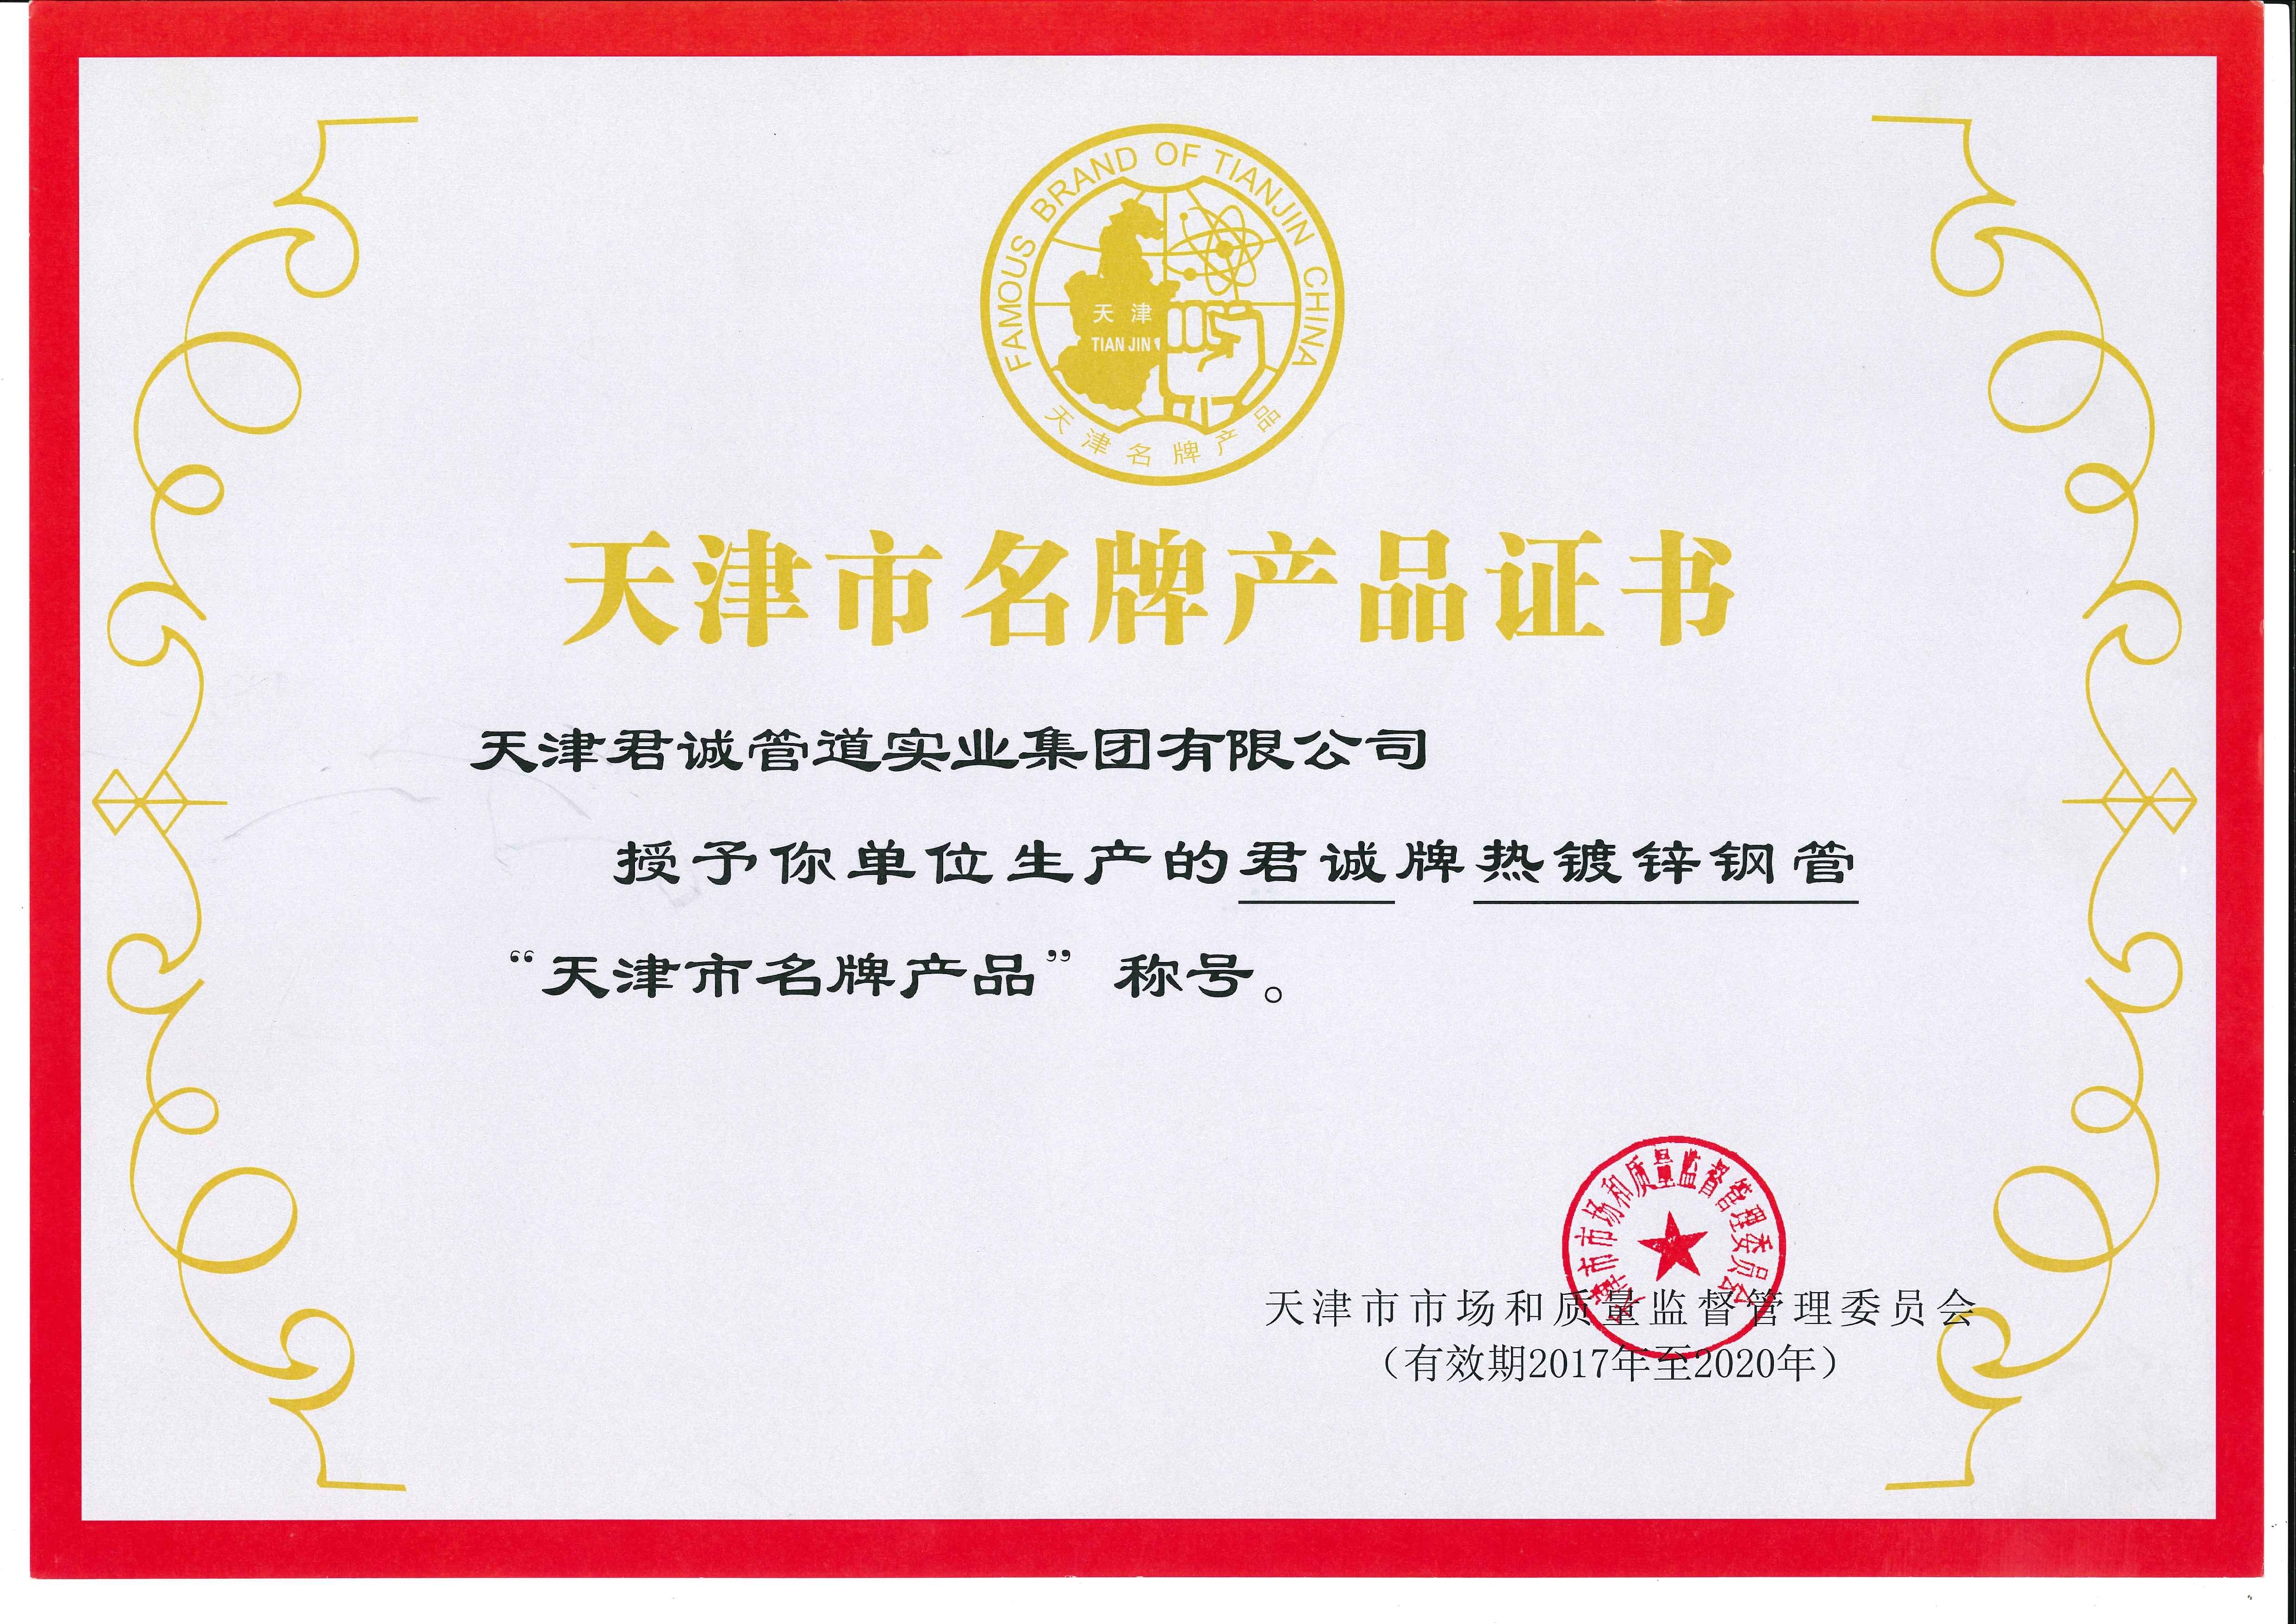 Tianjin Famous Brand Product Certificate